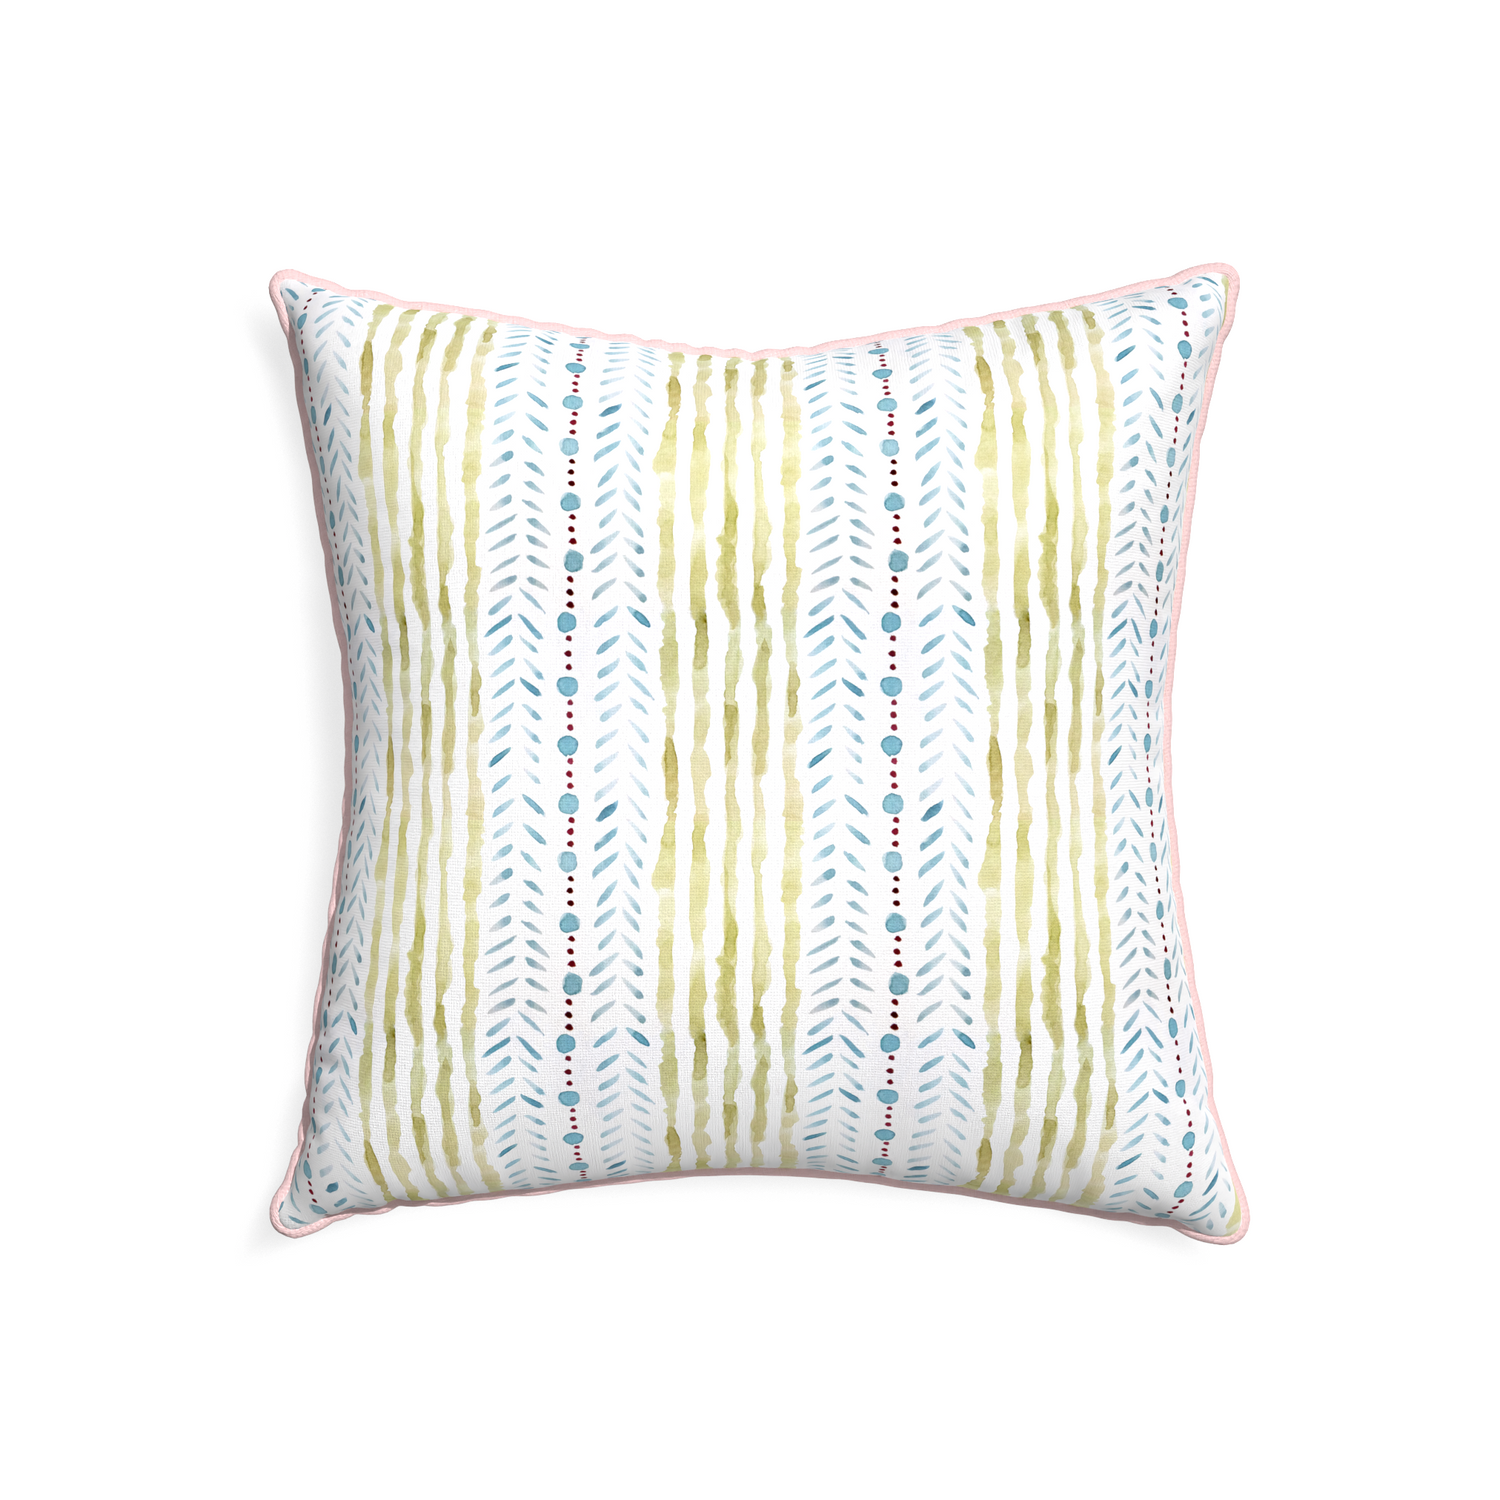 22-square julia custom blue & green stripedpillow with petal piping on white background